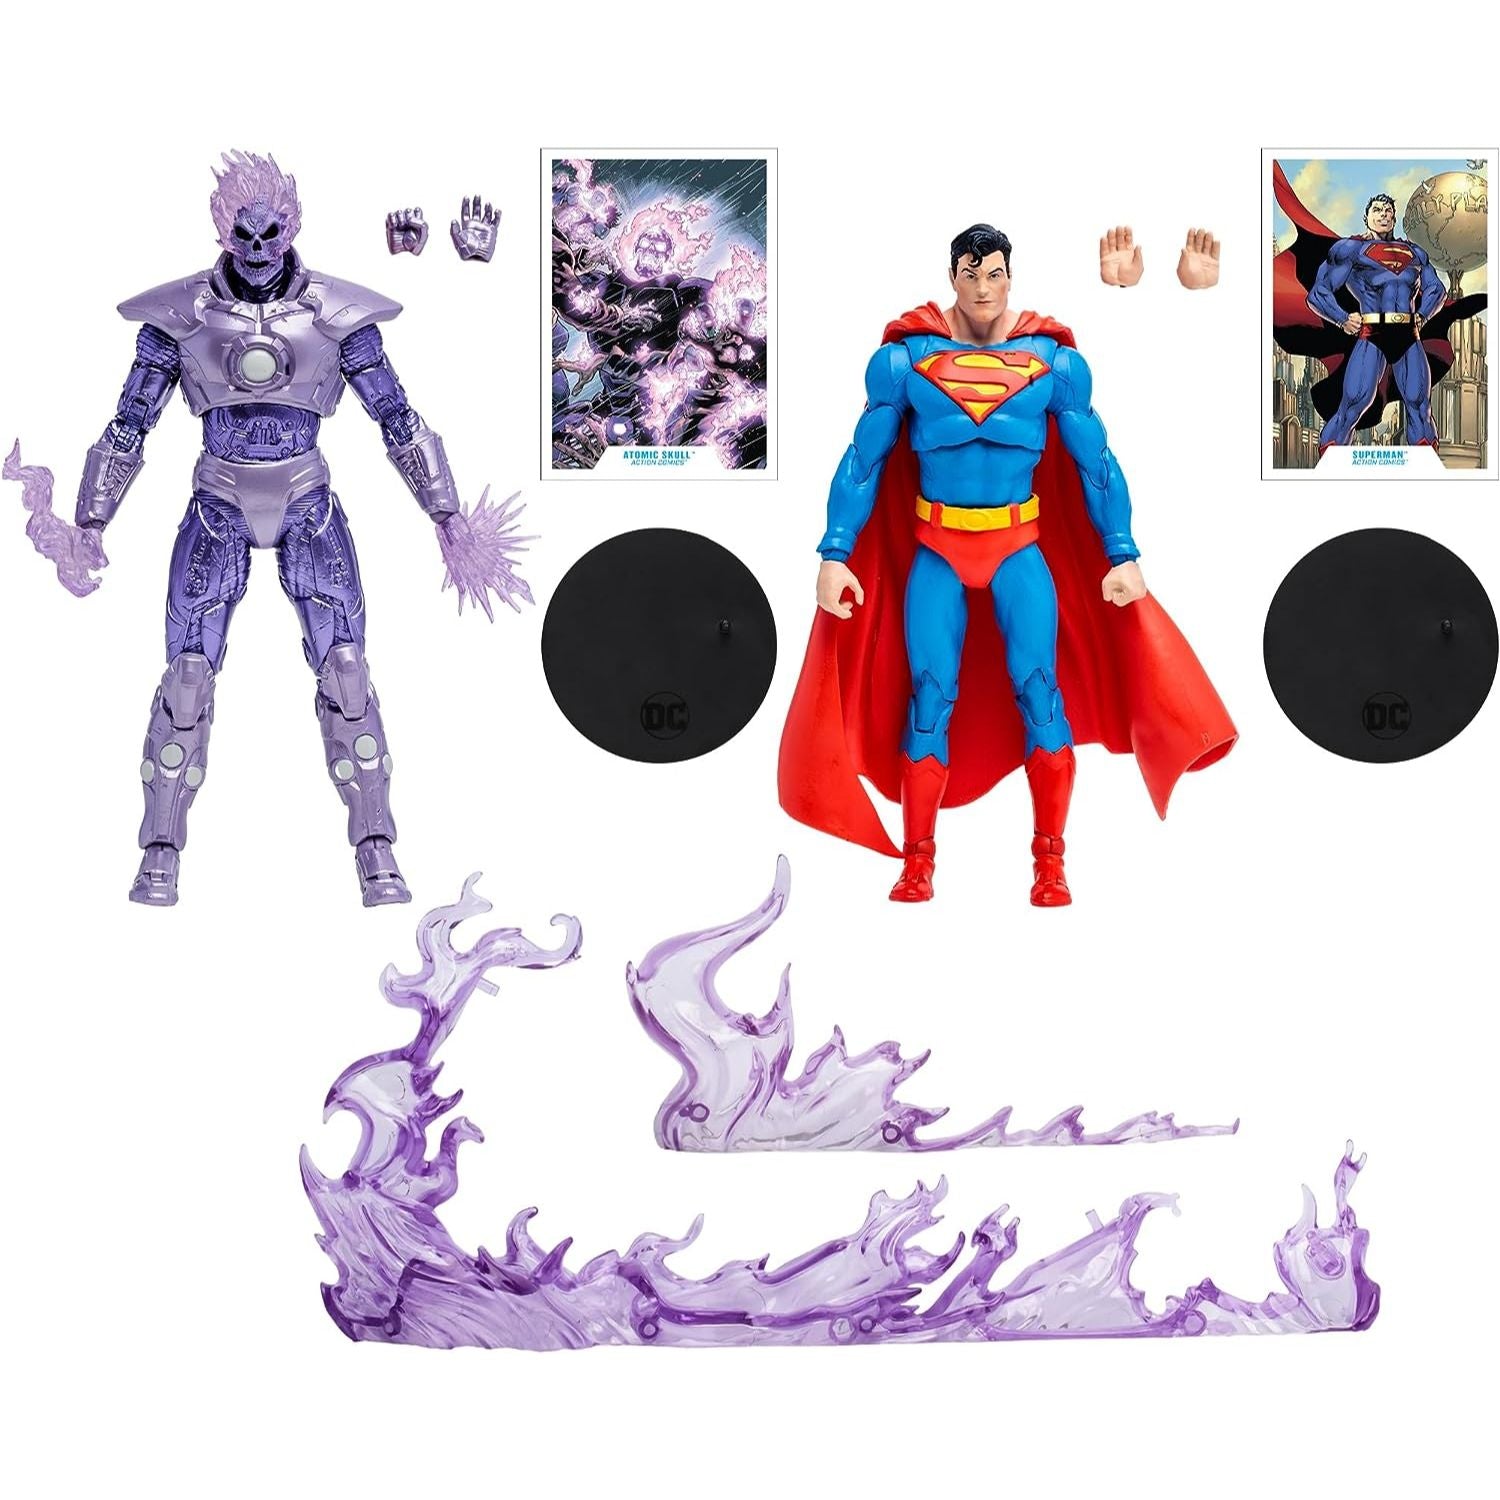 DC Multiverse Atomic Skull vs. Superman 2-Pack Action Figure Toy, Gold Label with accessories - Heretoserveyou